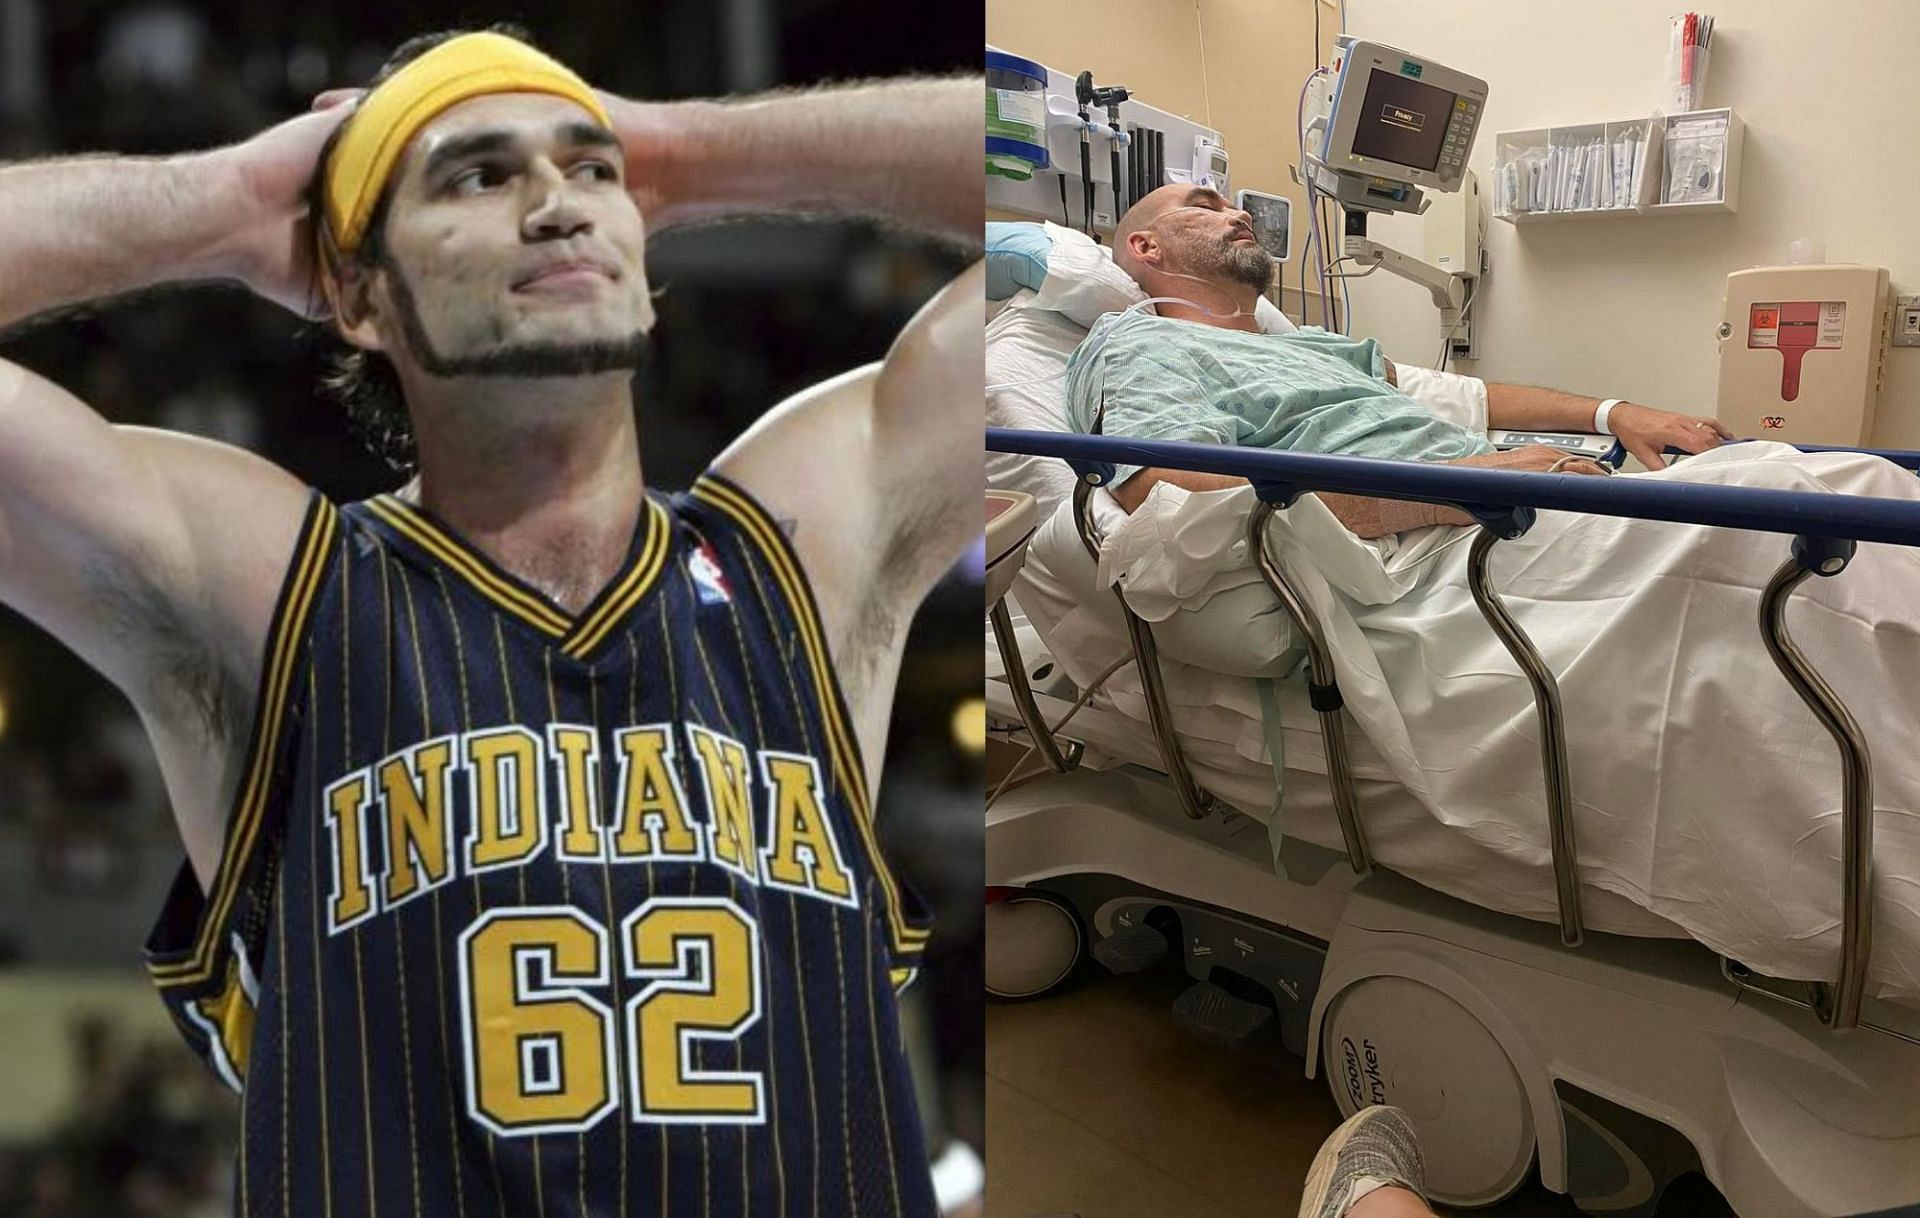 Former NBA player Scot Pollard is looking for a heart donor to save his life